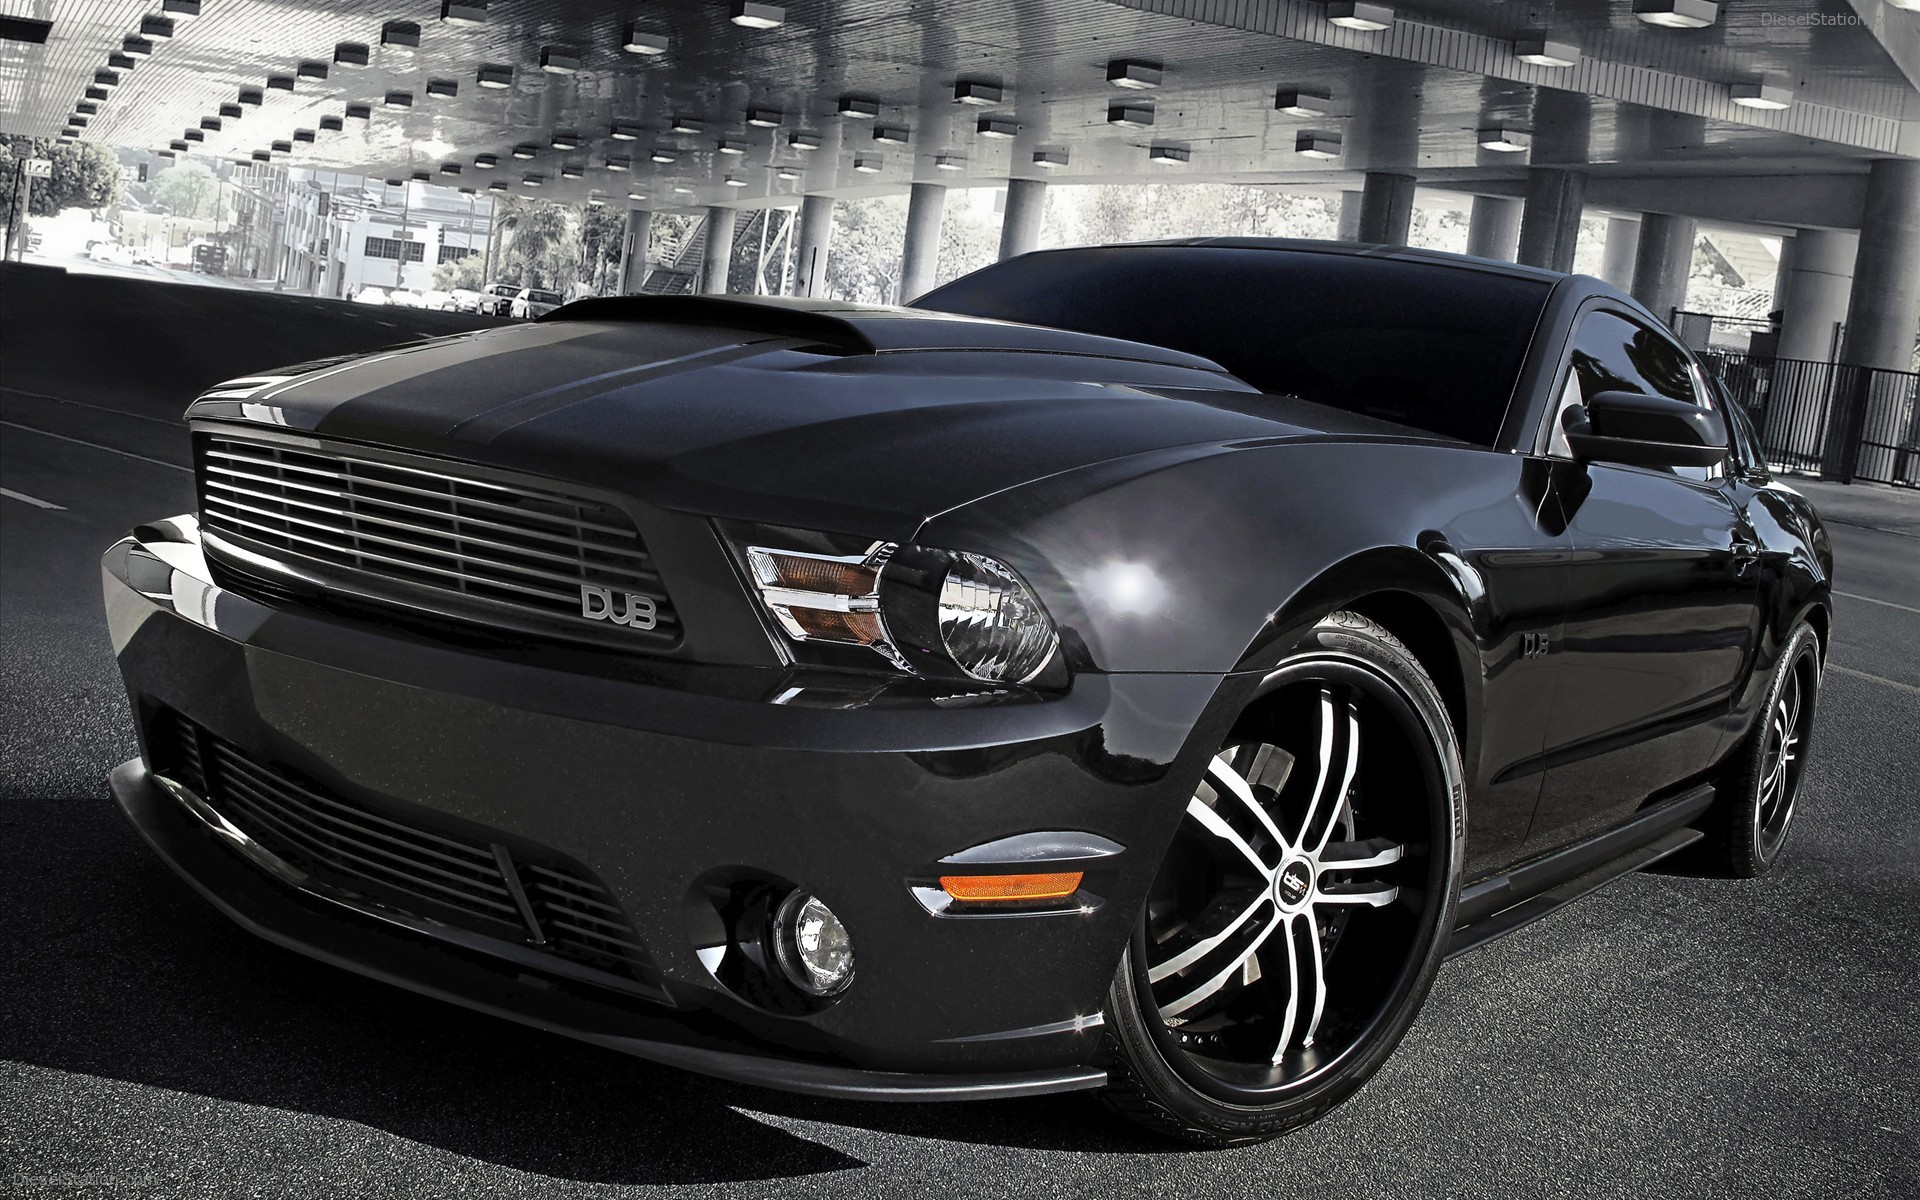 Ford Mustang Dub Edition Widescreen Exotic Car Picture Of